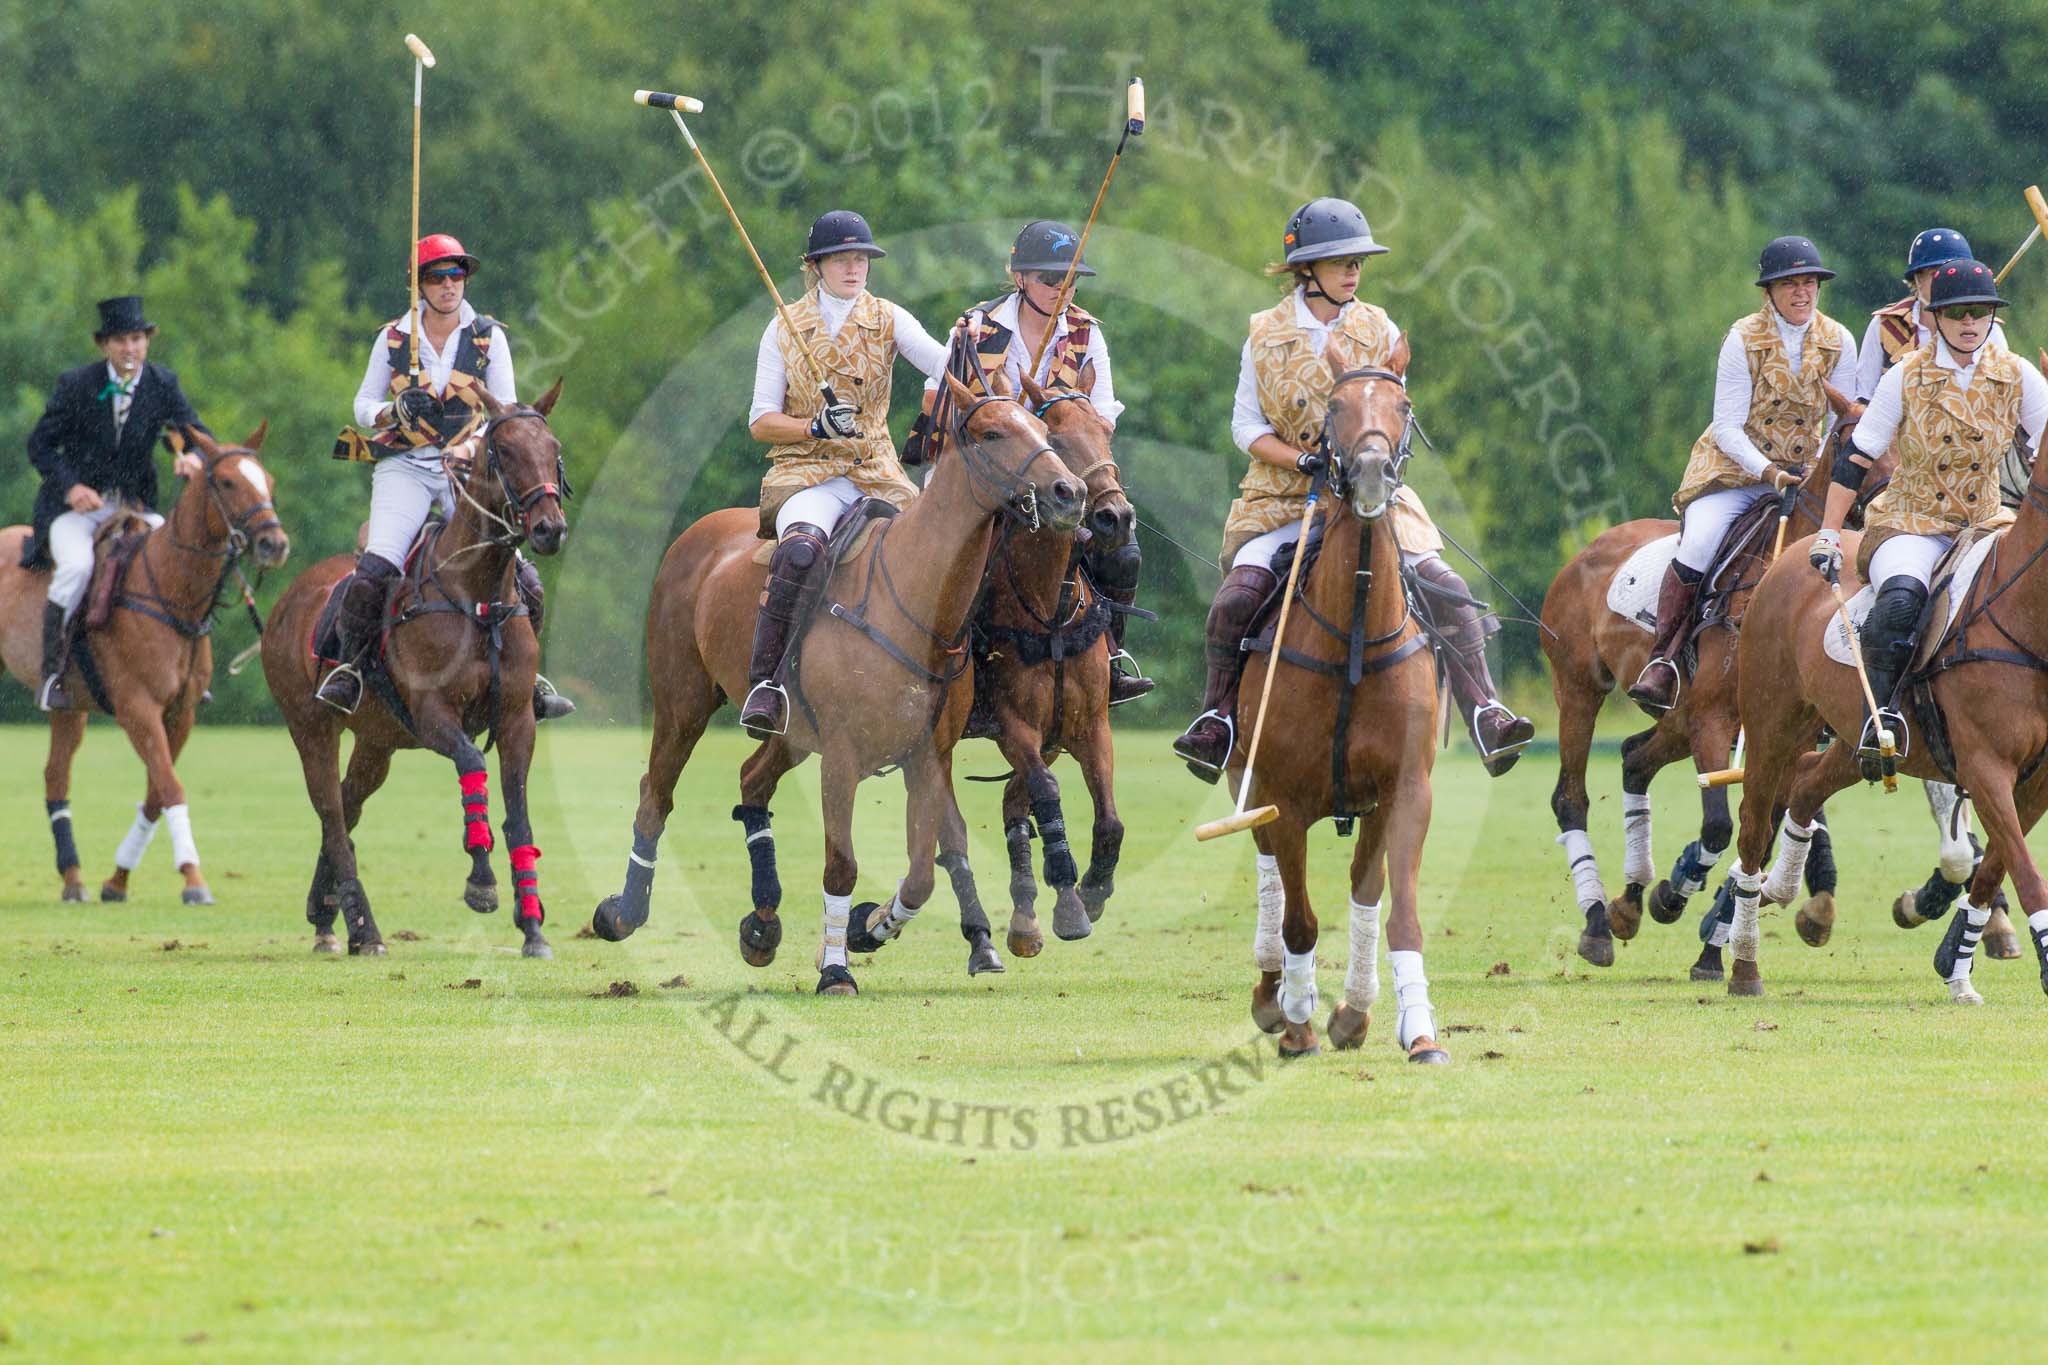 7th Heritage Polo Cup semi-finals: The Amazons of Polo v The Ladies of the British Empire, sponsored by Polistas and Liberty Freedom.
Hurtwood Park Polo Club,
Ewhurst Green,
Surrey,
United Kingdom,
on 04 August 2012 at 13:28, image #136